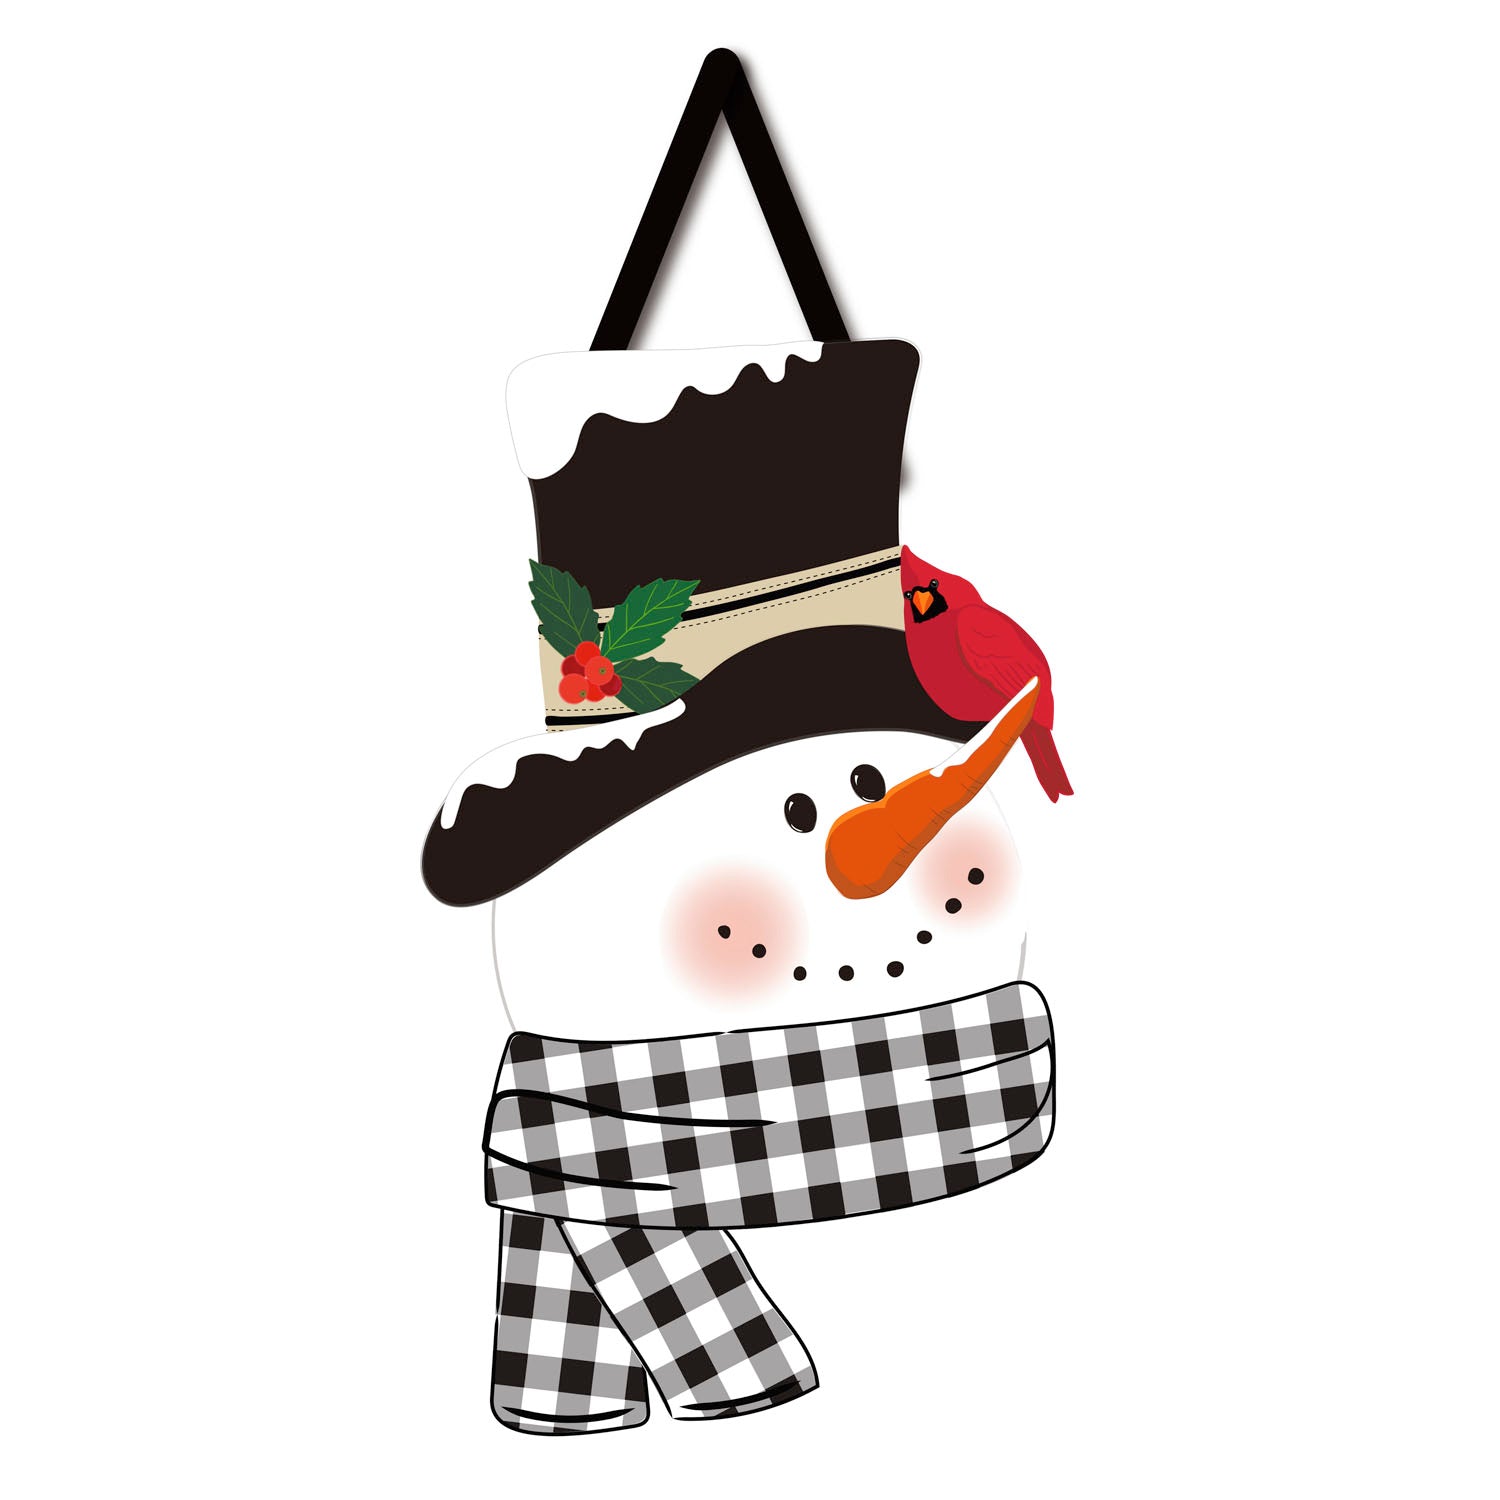 Our Snowman and Friend Door Décor features the head of a snowman with a black top hat, black & white checked scarf and a cardinal sitting on his carrot nose.